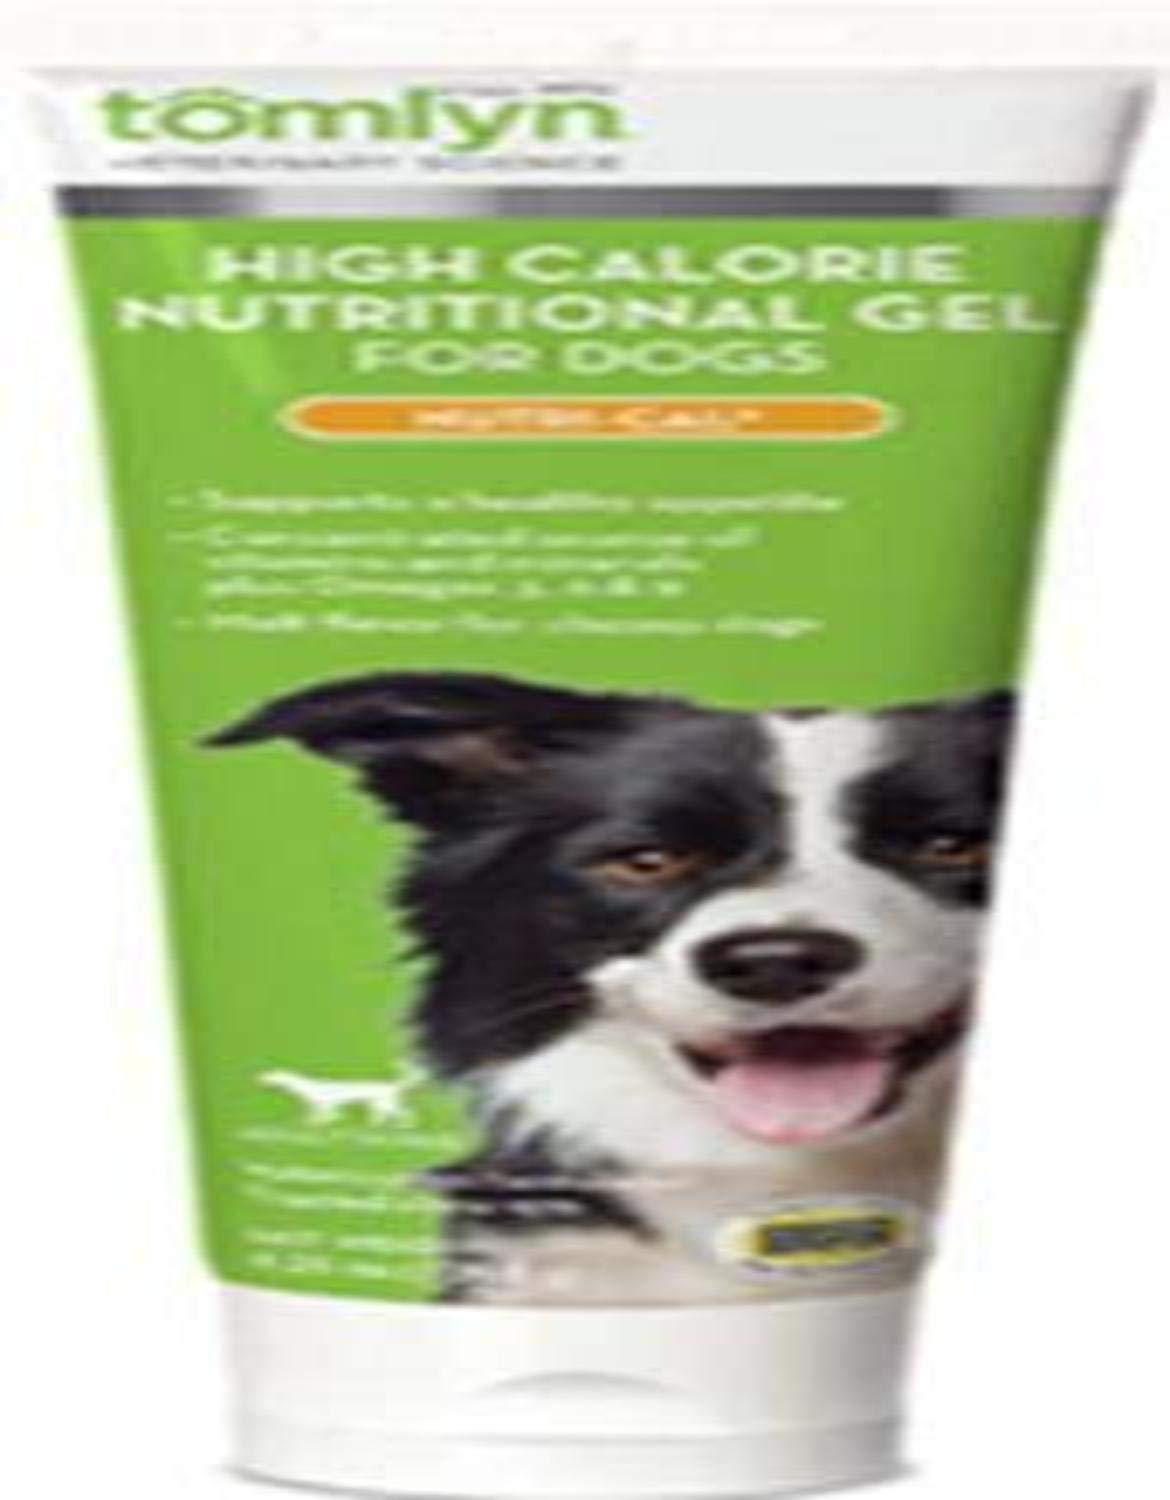 TOMLYN Nutri-Cal High Calorie-Nutritional Gel for Dogs & Puppies, 4.25oz